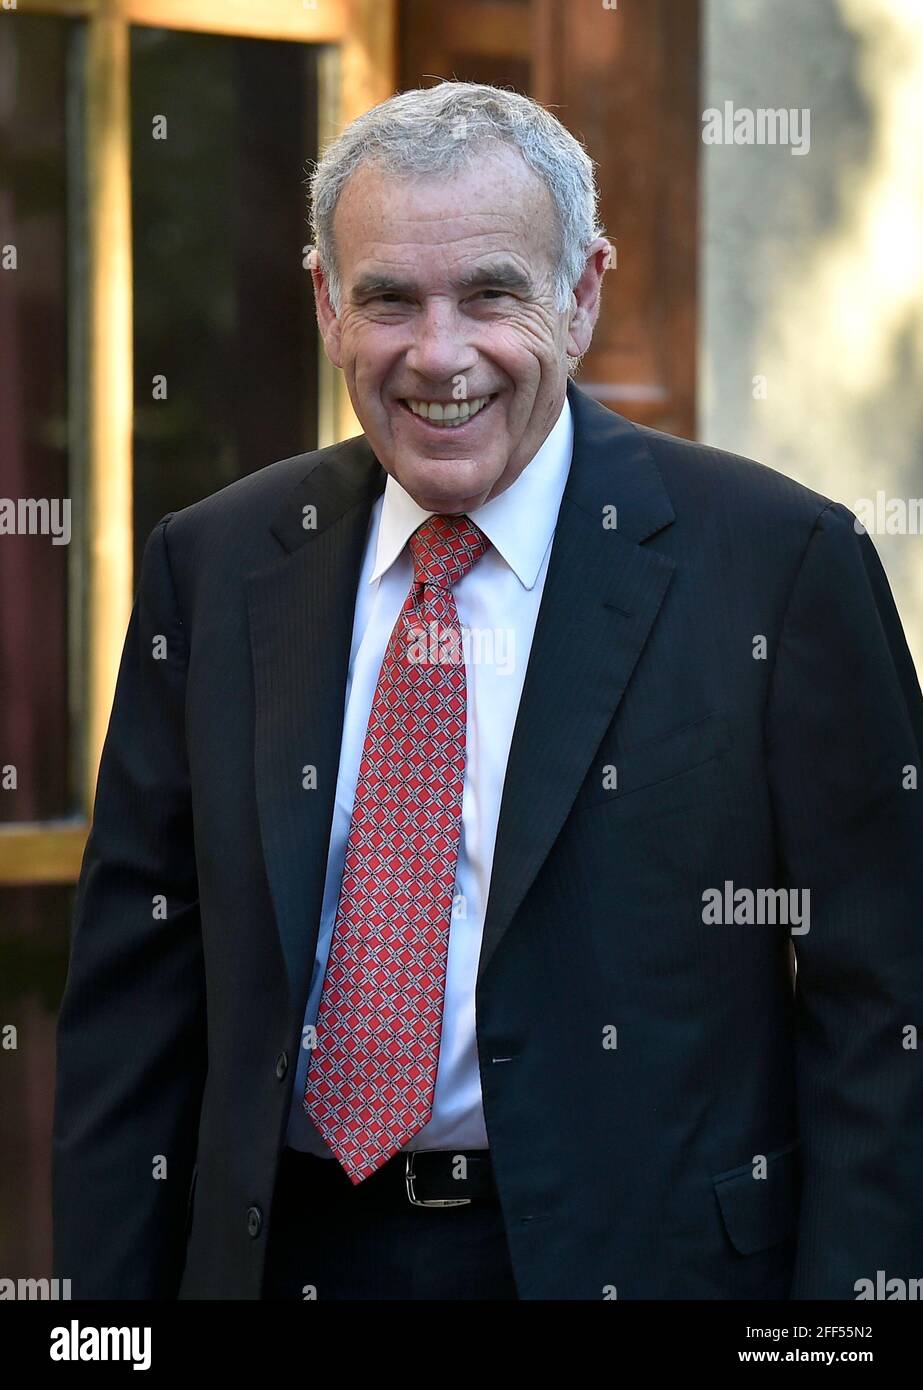 Las Vegas, Nevada, USA. 3rd June, 2016. Silverton hotel-casino owner and  president and chairman of Majestic Realty Co. Edward Roski arrives at the  Gridiron Greats Hall of Fame Induction dinner at the